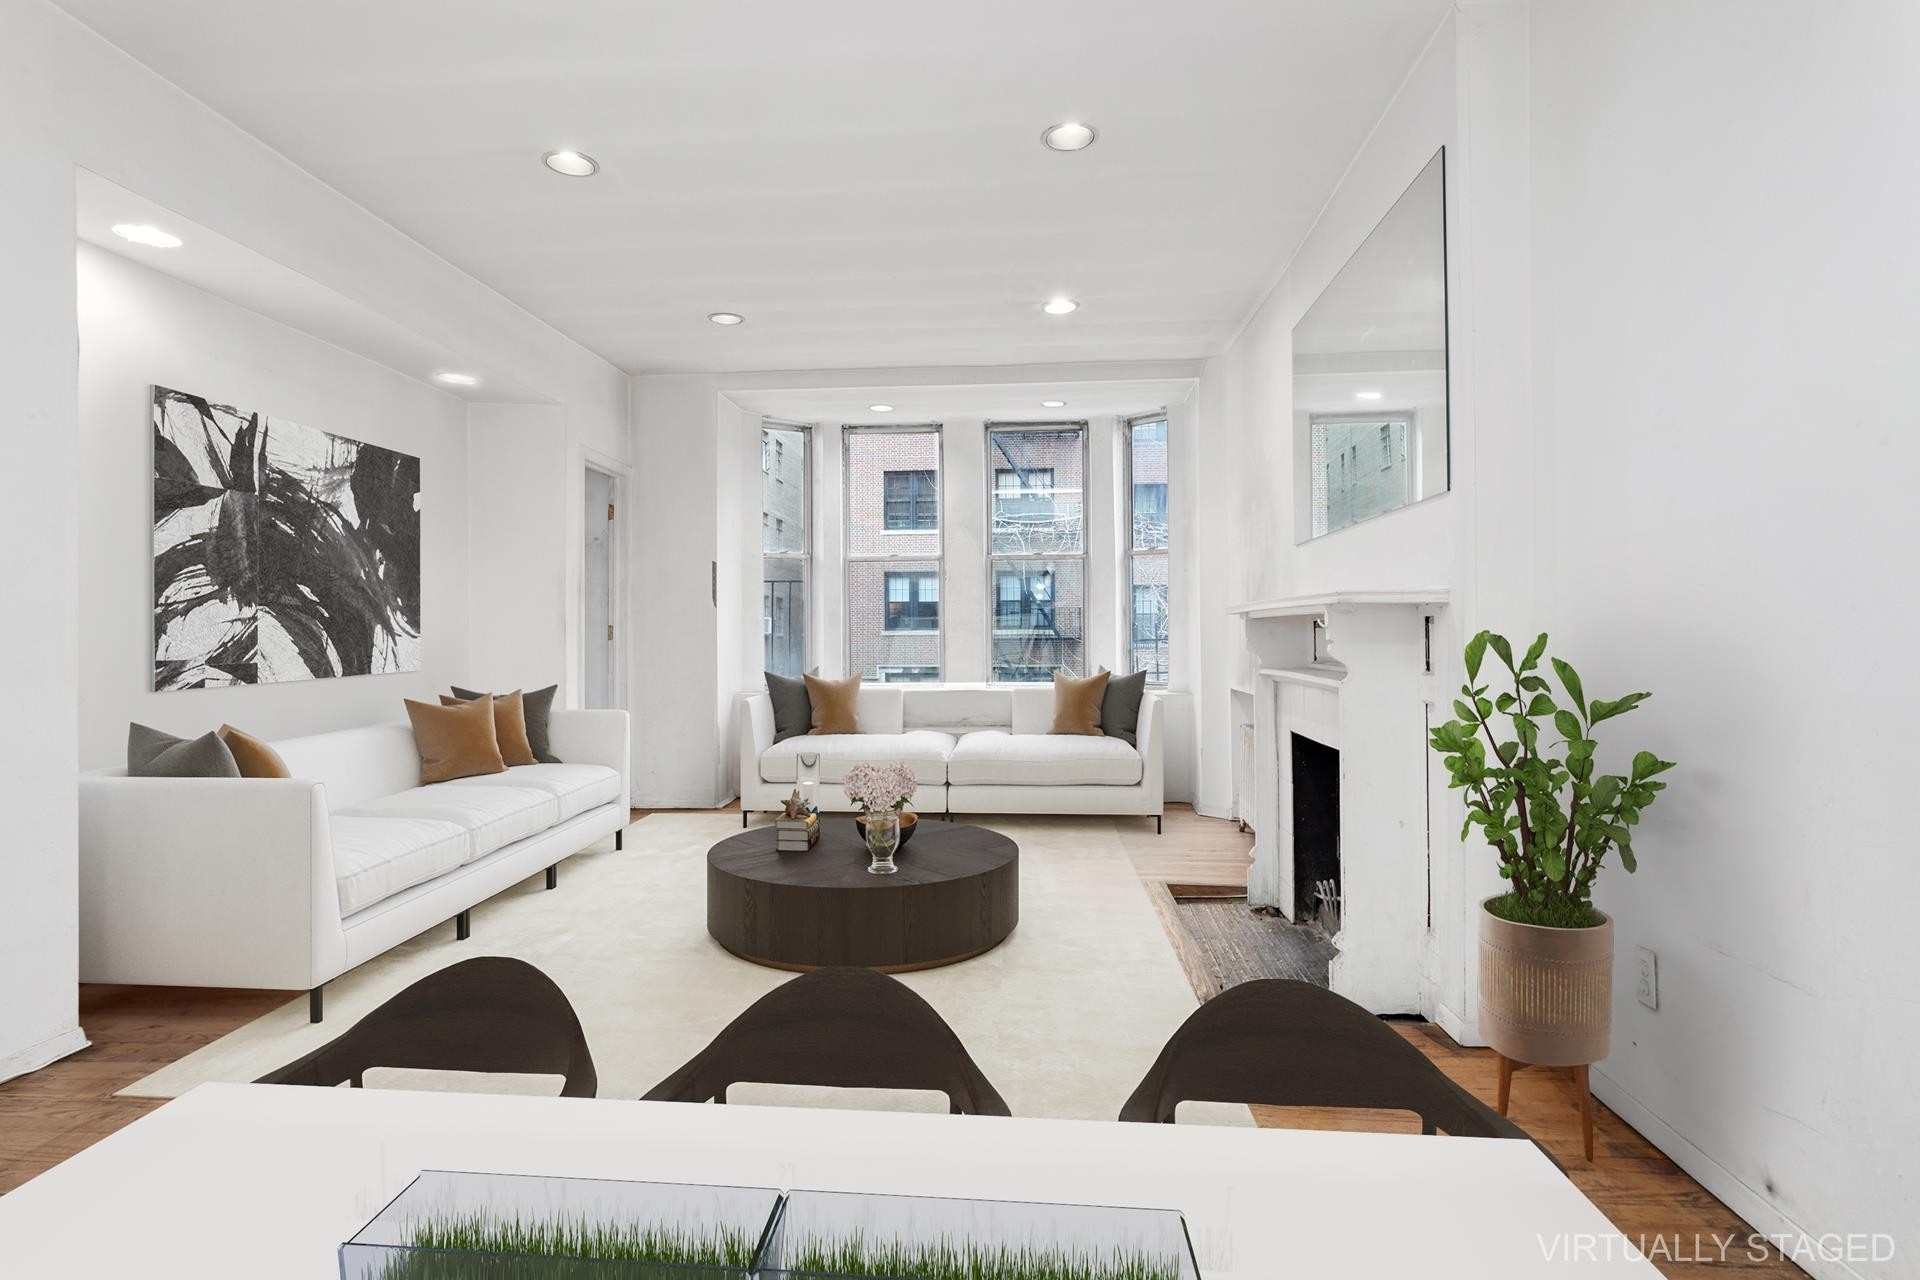 Co-op Properties for Sale at 62 MONTAGUE ST, 3BC Brooklyn Heights, Brooklyn, NY 11201